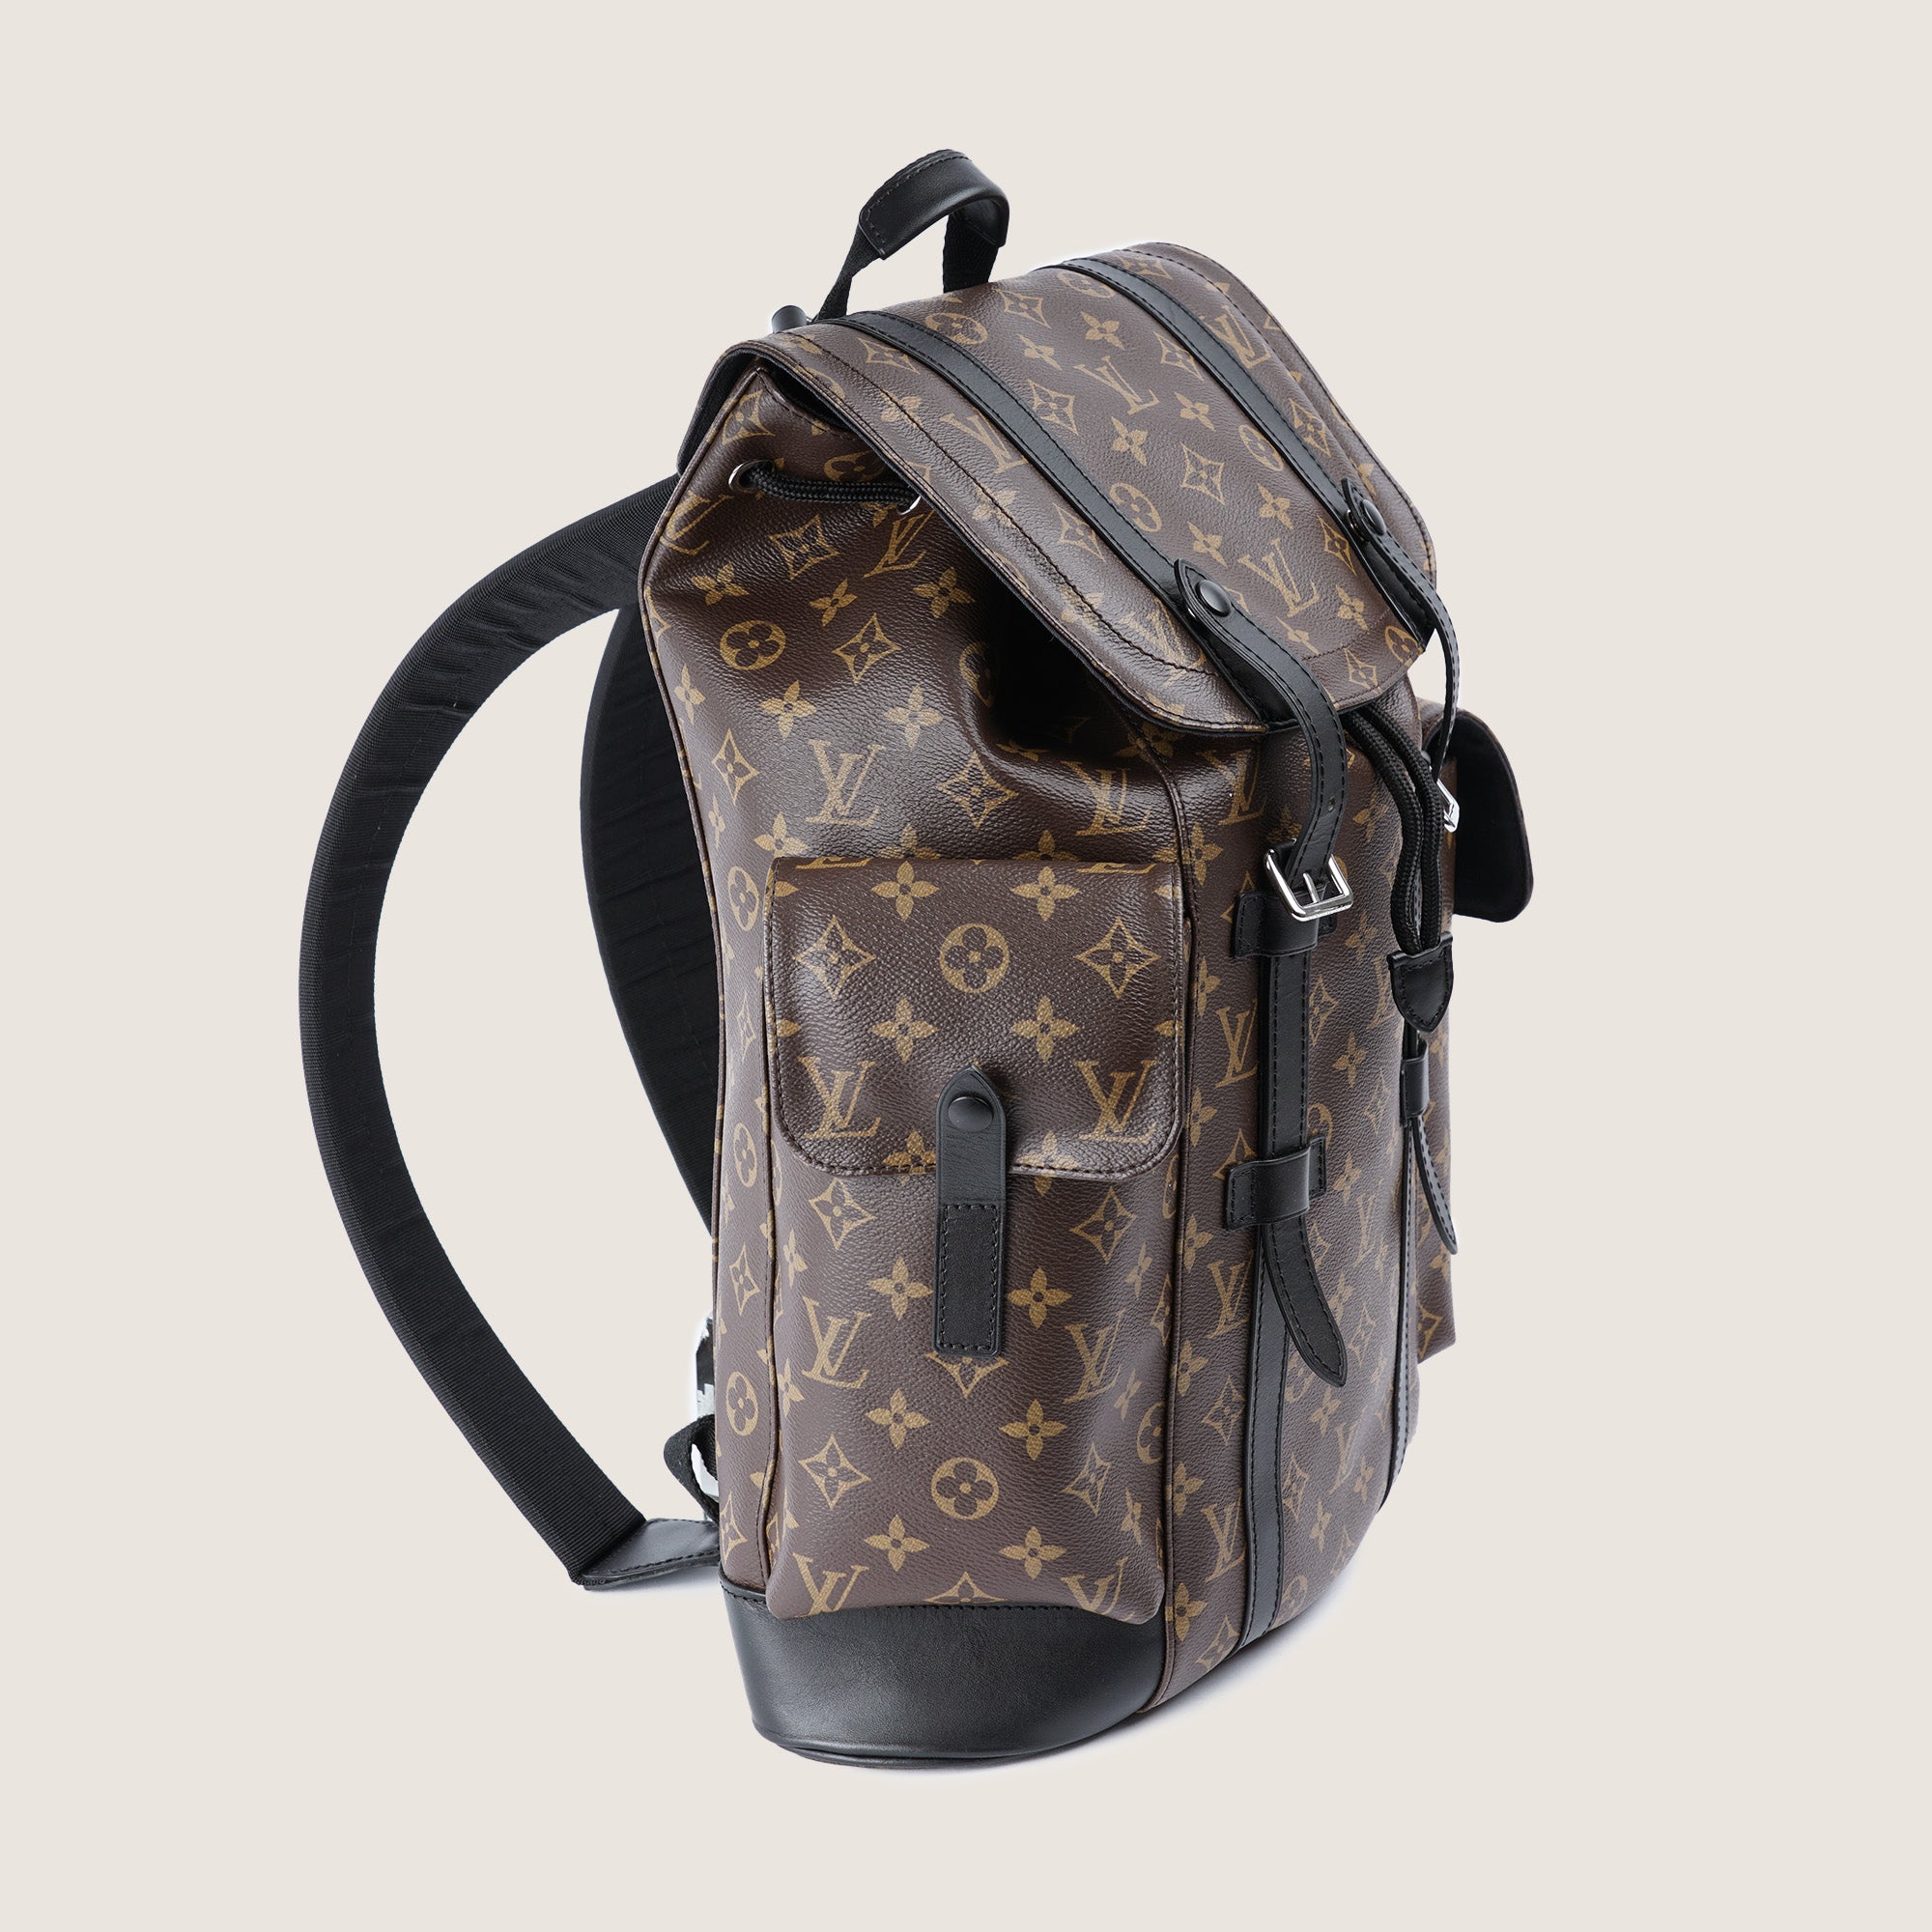 Christopher PM Backpack - LOUIS VUITTON - Affordable Luxury